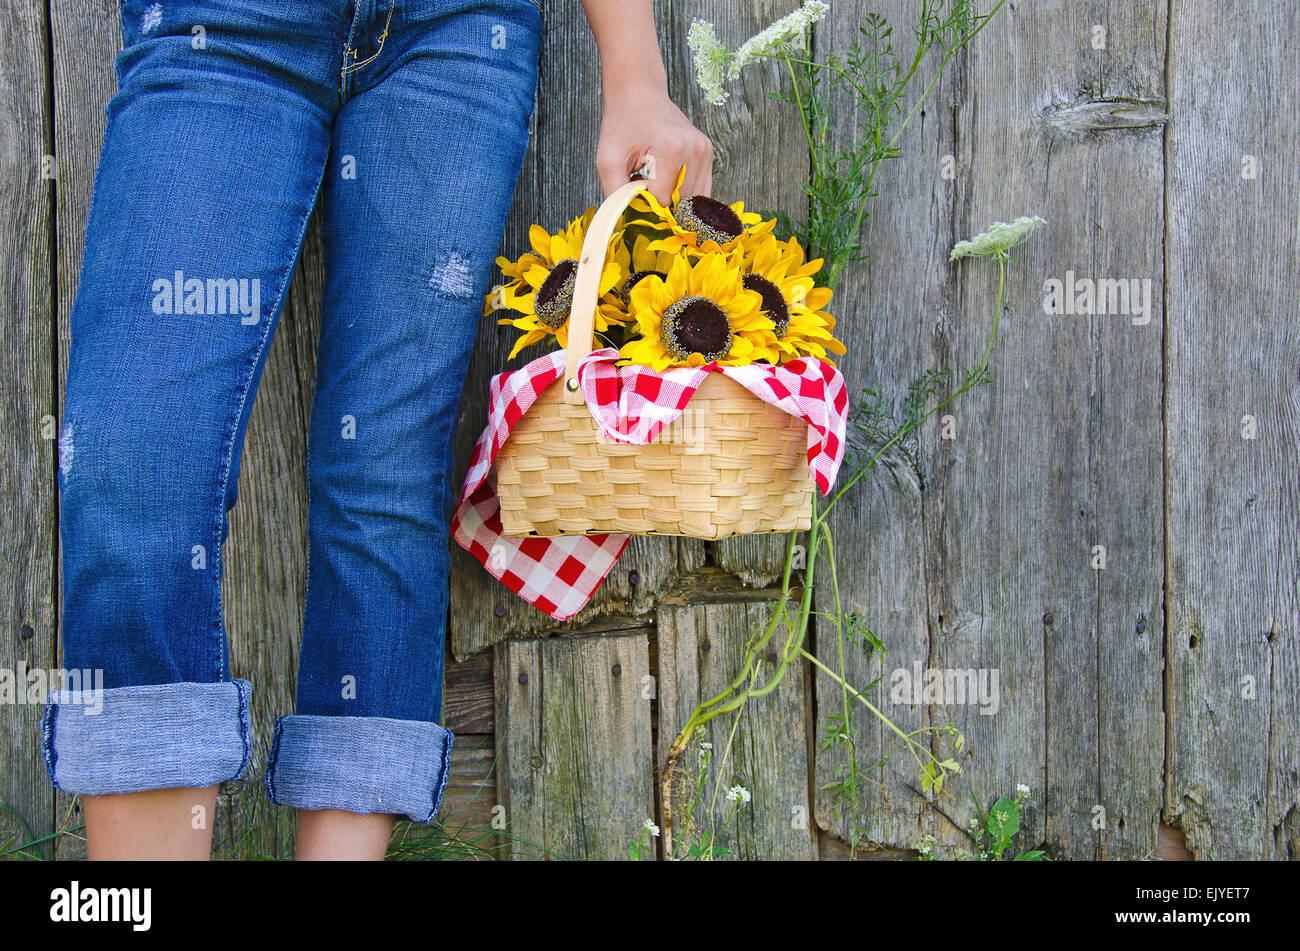 Young girl in blue jeans with sunflower basket by old barn. Stock Photo